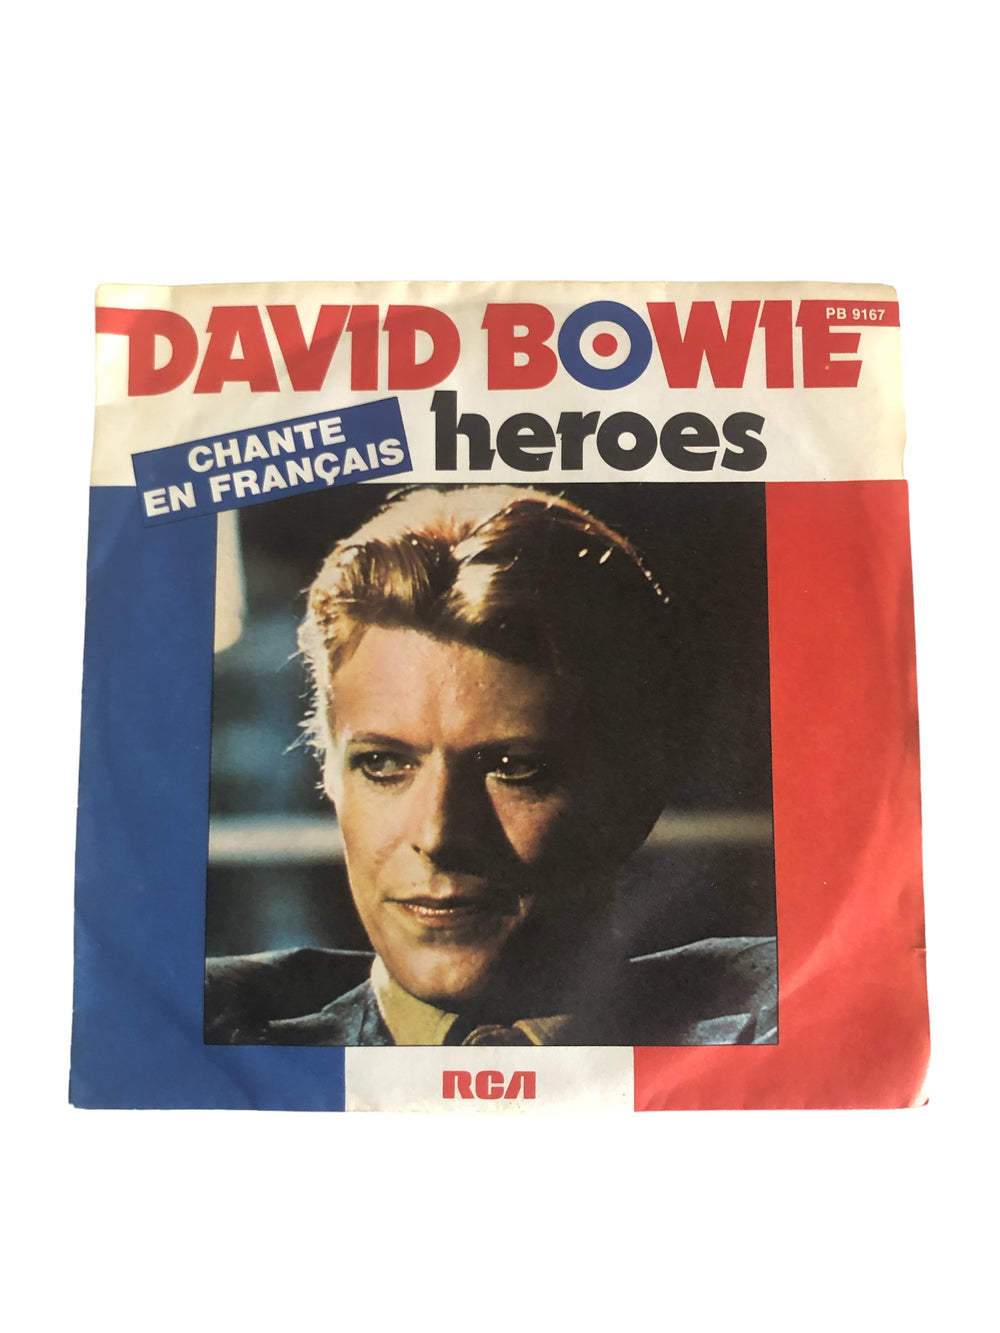 David Bowie ‎– Heroes 7 Inch Vinyl RCA Sung In French Preloved: 1977